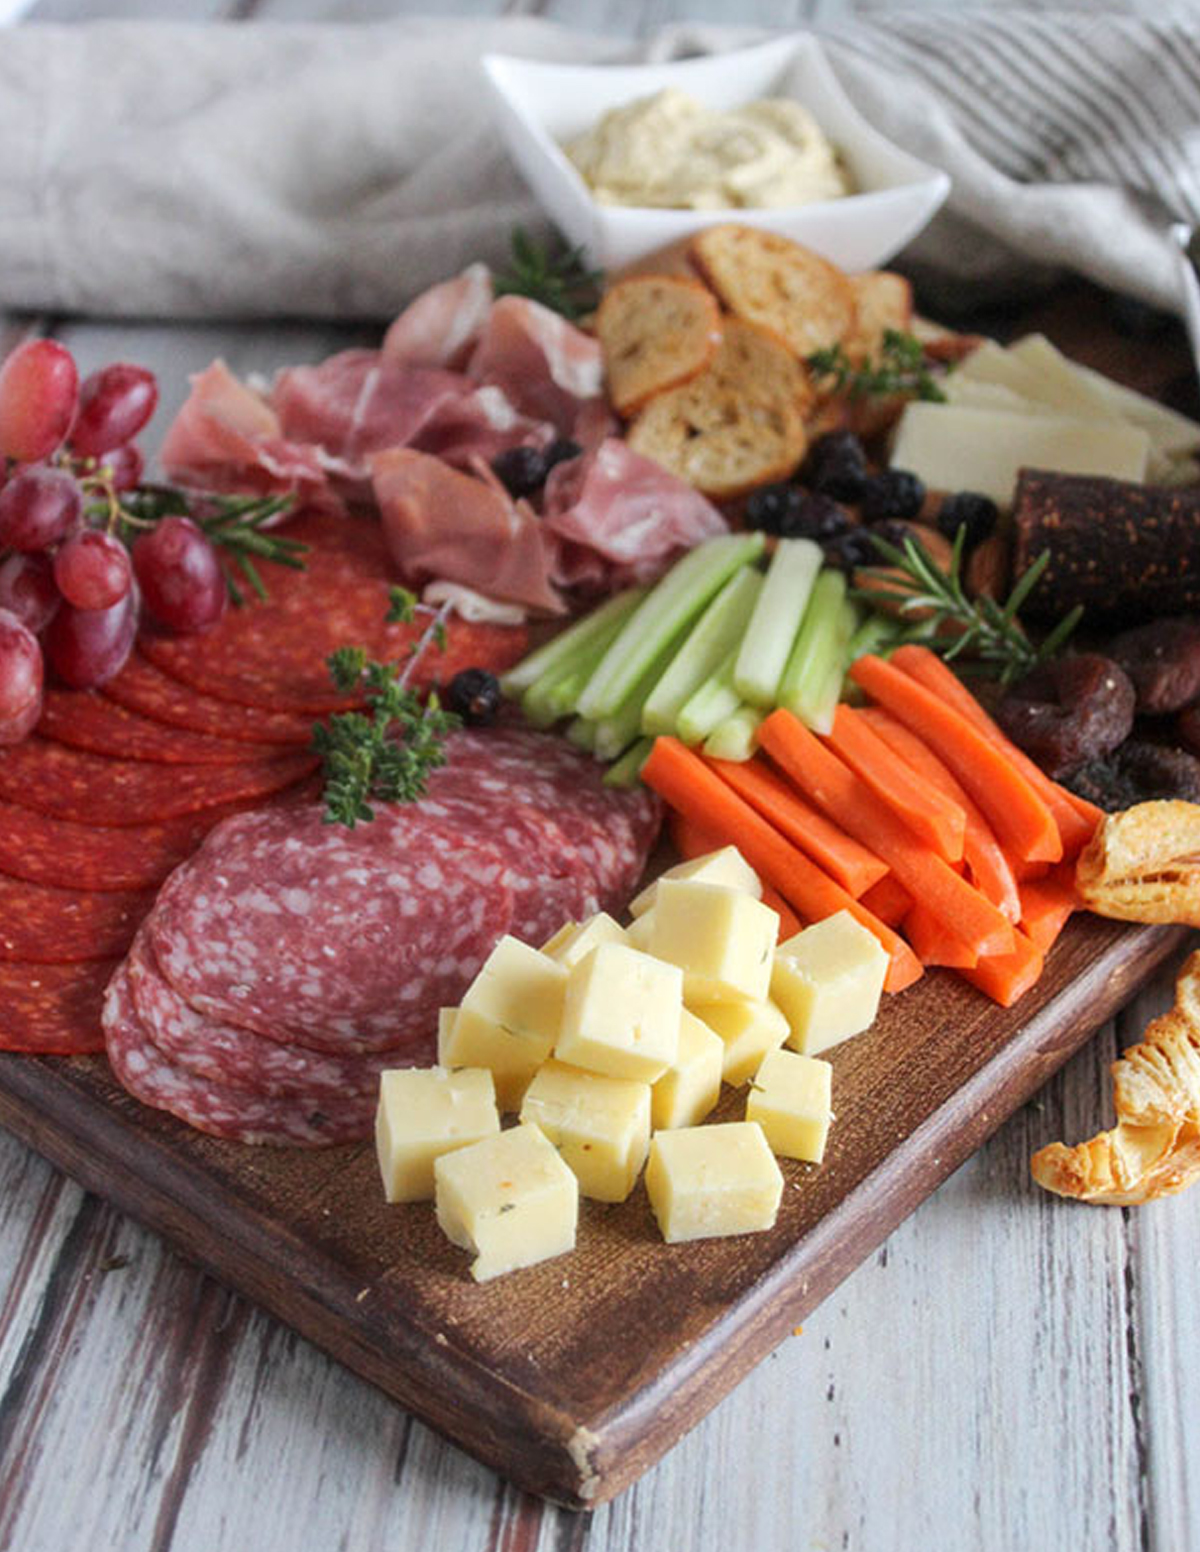 Simple and Savory displays, celery, carrots, meats, cheese, and grapes on their charcuterie board.